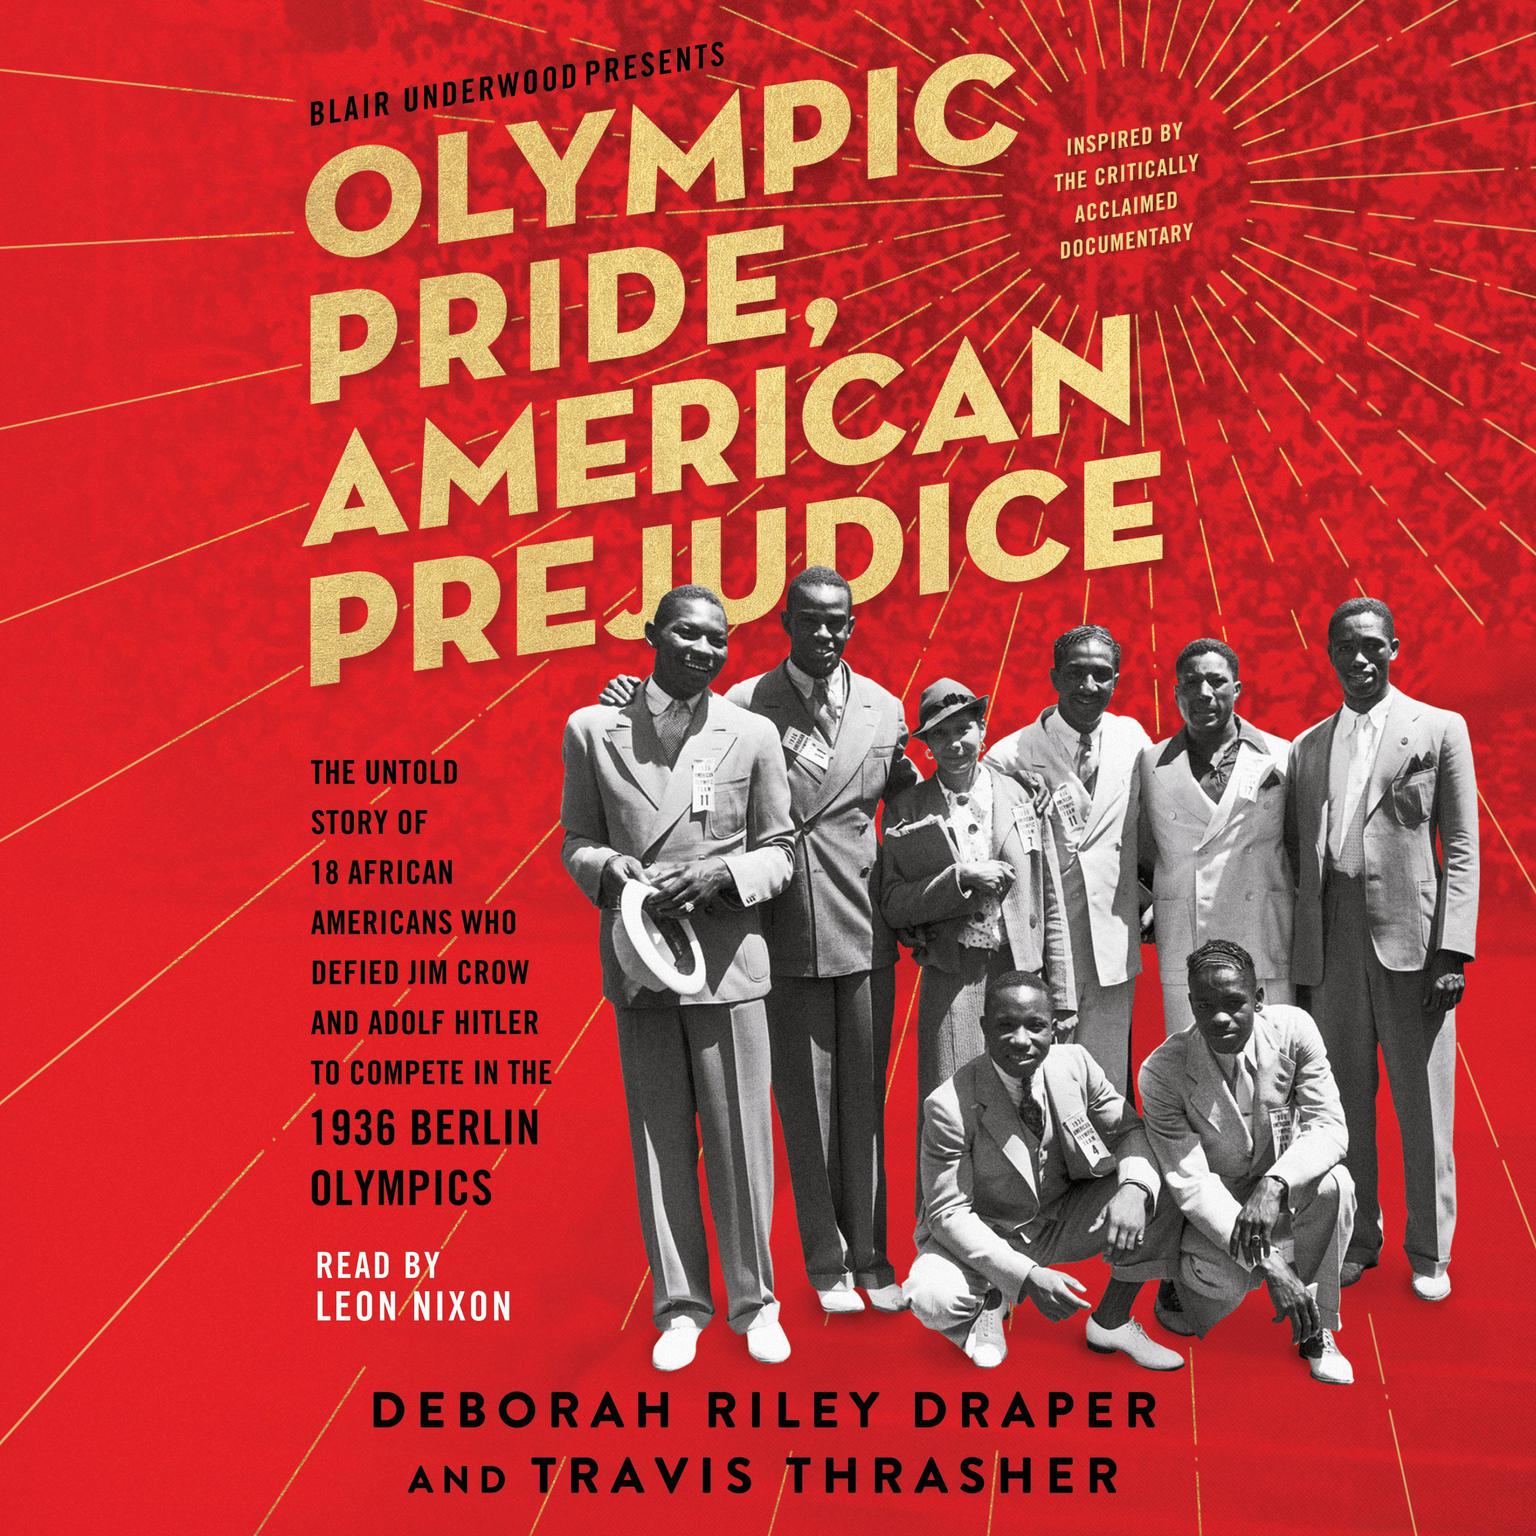 Olympic Pride, American Prejudice: The Untold Story of 18 African Americans Who Defied Jim Crow and Adolf Hitler to Compete in the 1936 Berlin Olympics Audiobook, by Deborah Riley Draper